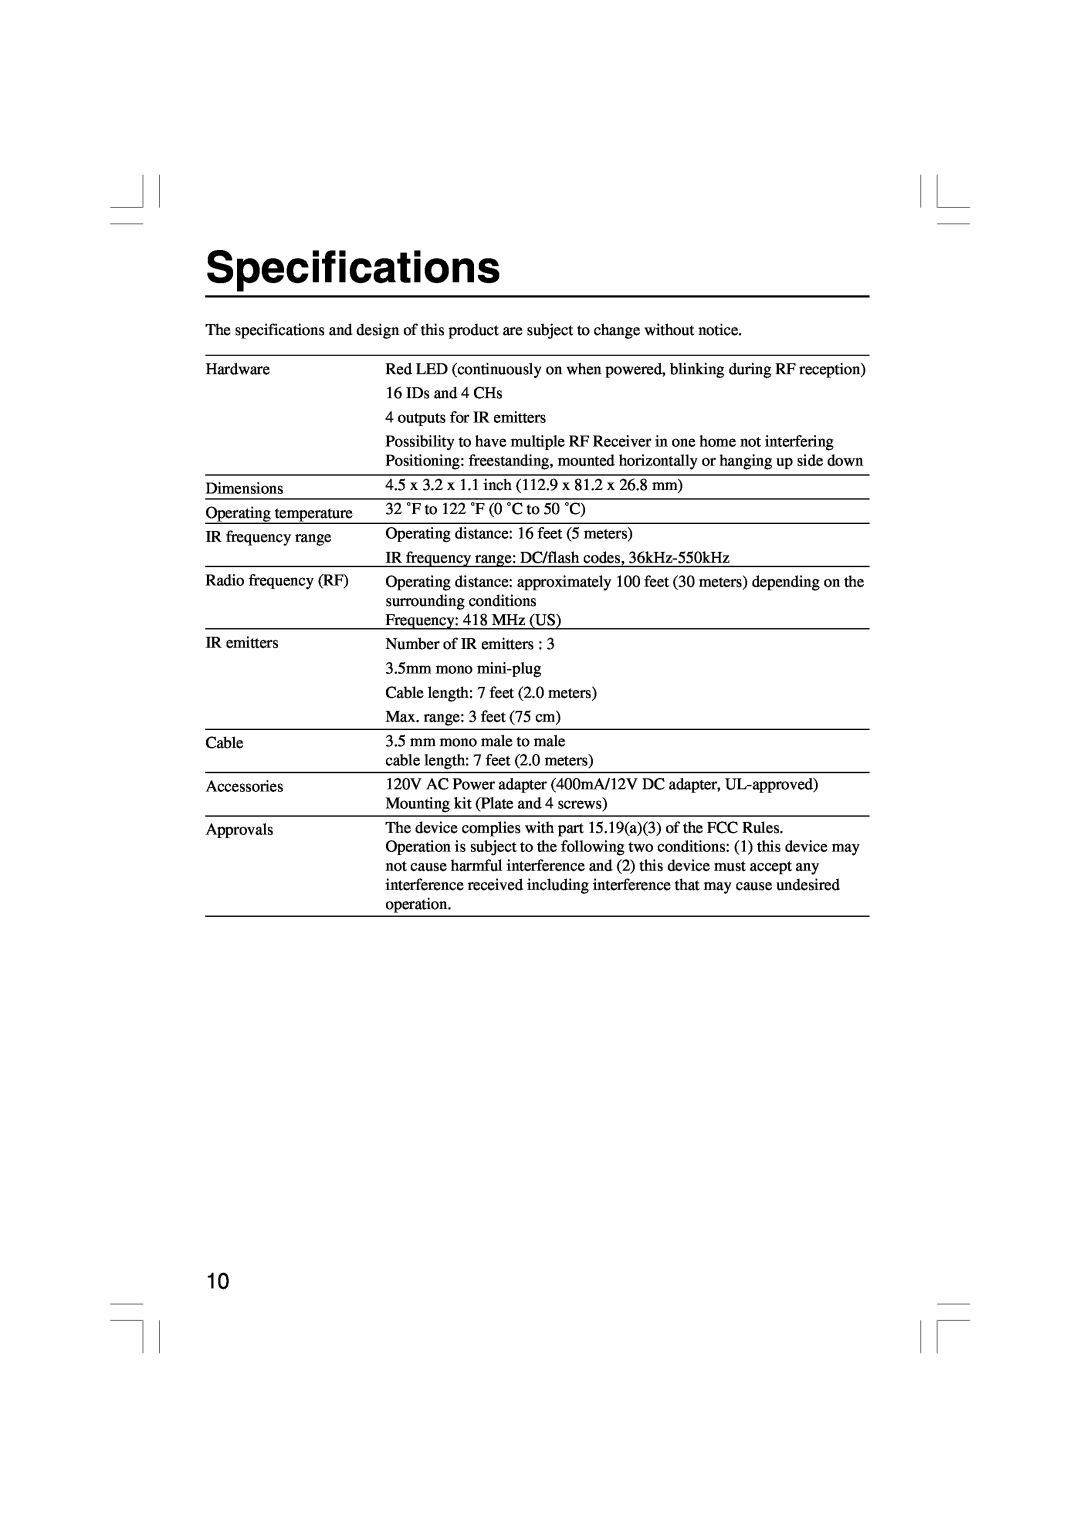 Onkyo RFR-5 instruction manual Specifications 